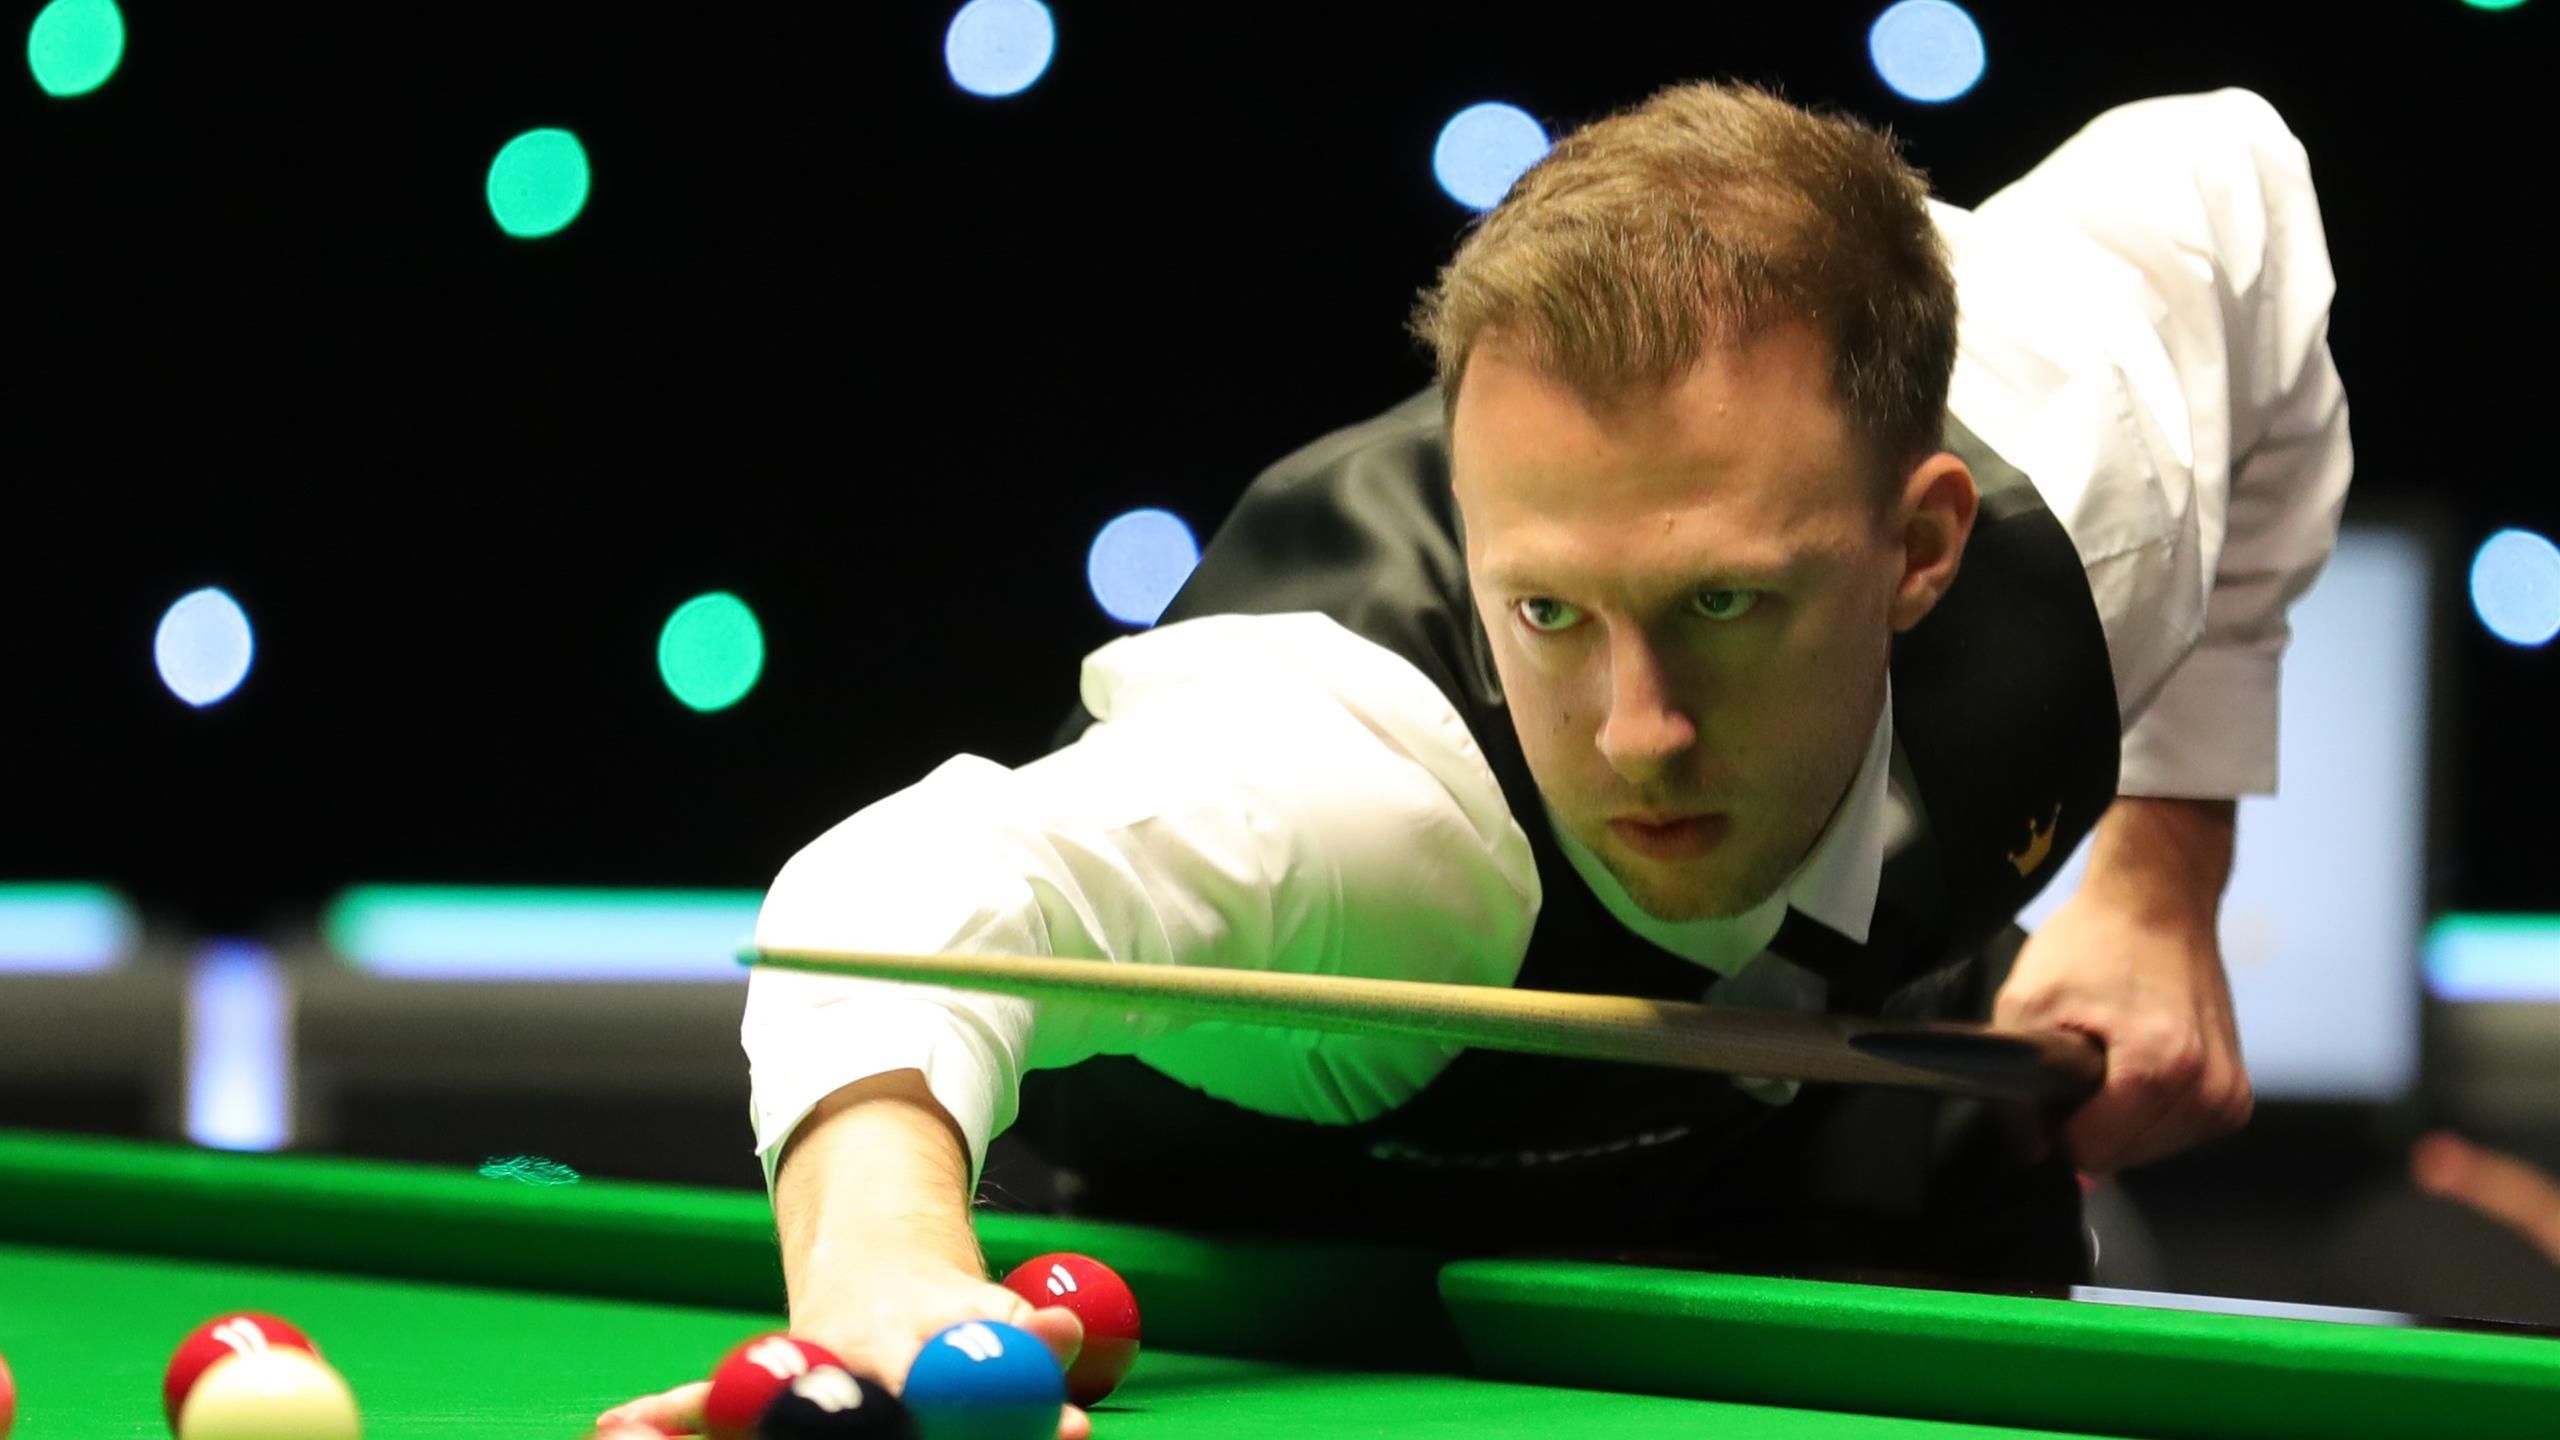 Snooker news Judd Trump extends lead at top of world rankings, Jack Lisowski inside top 16